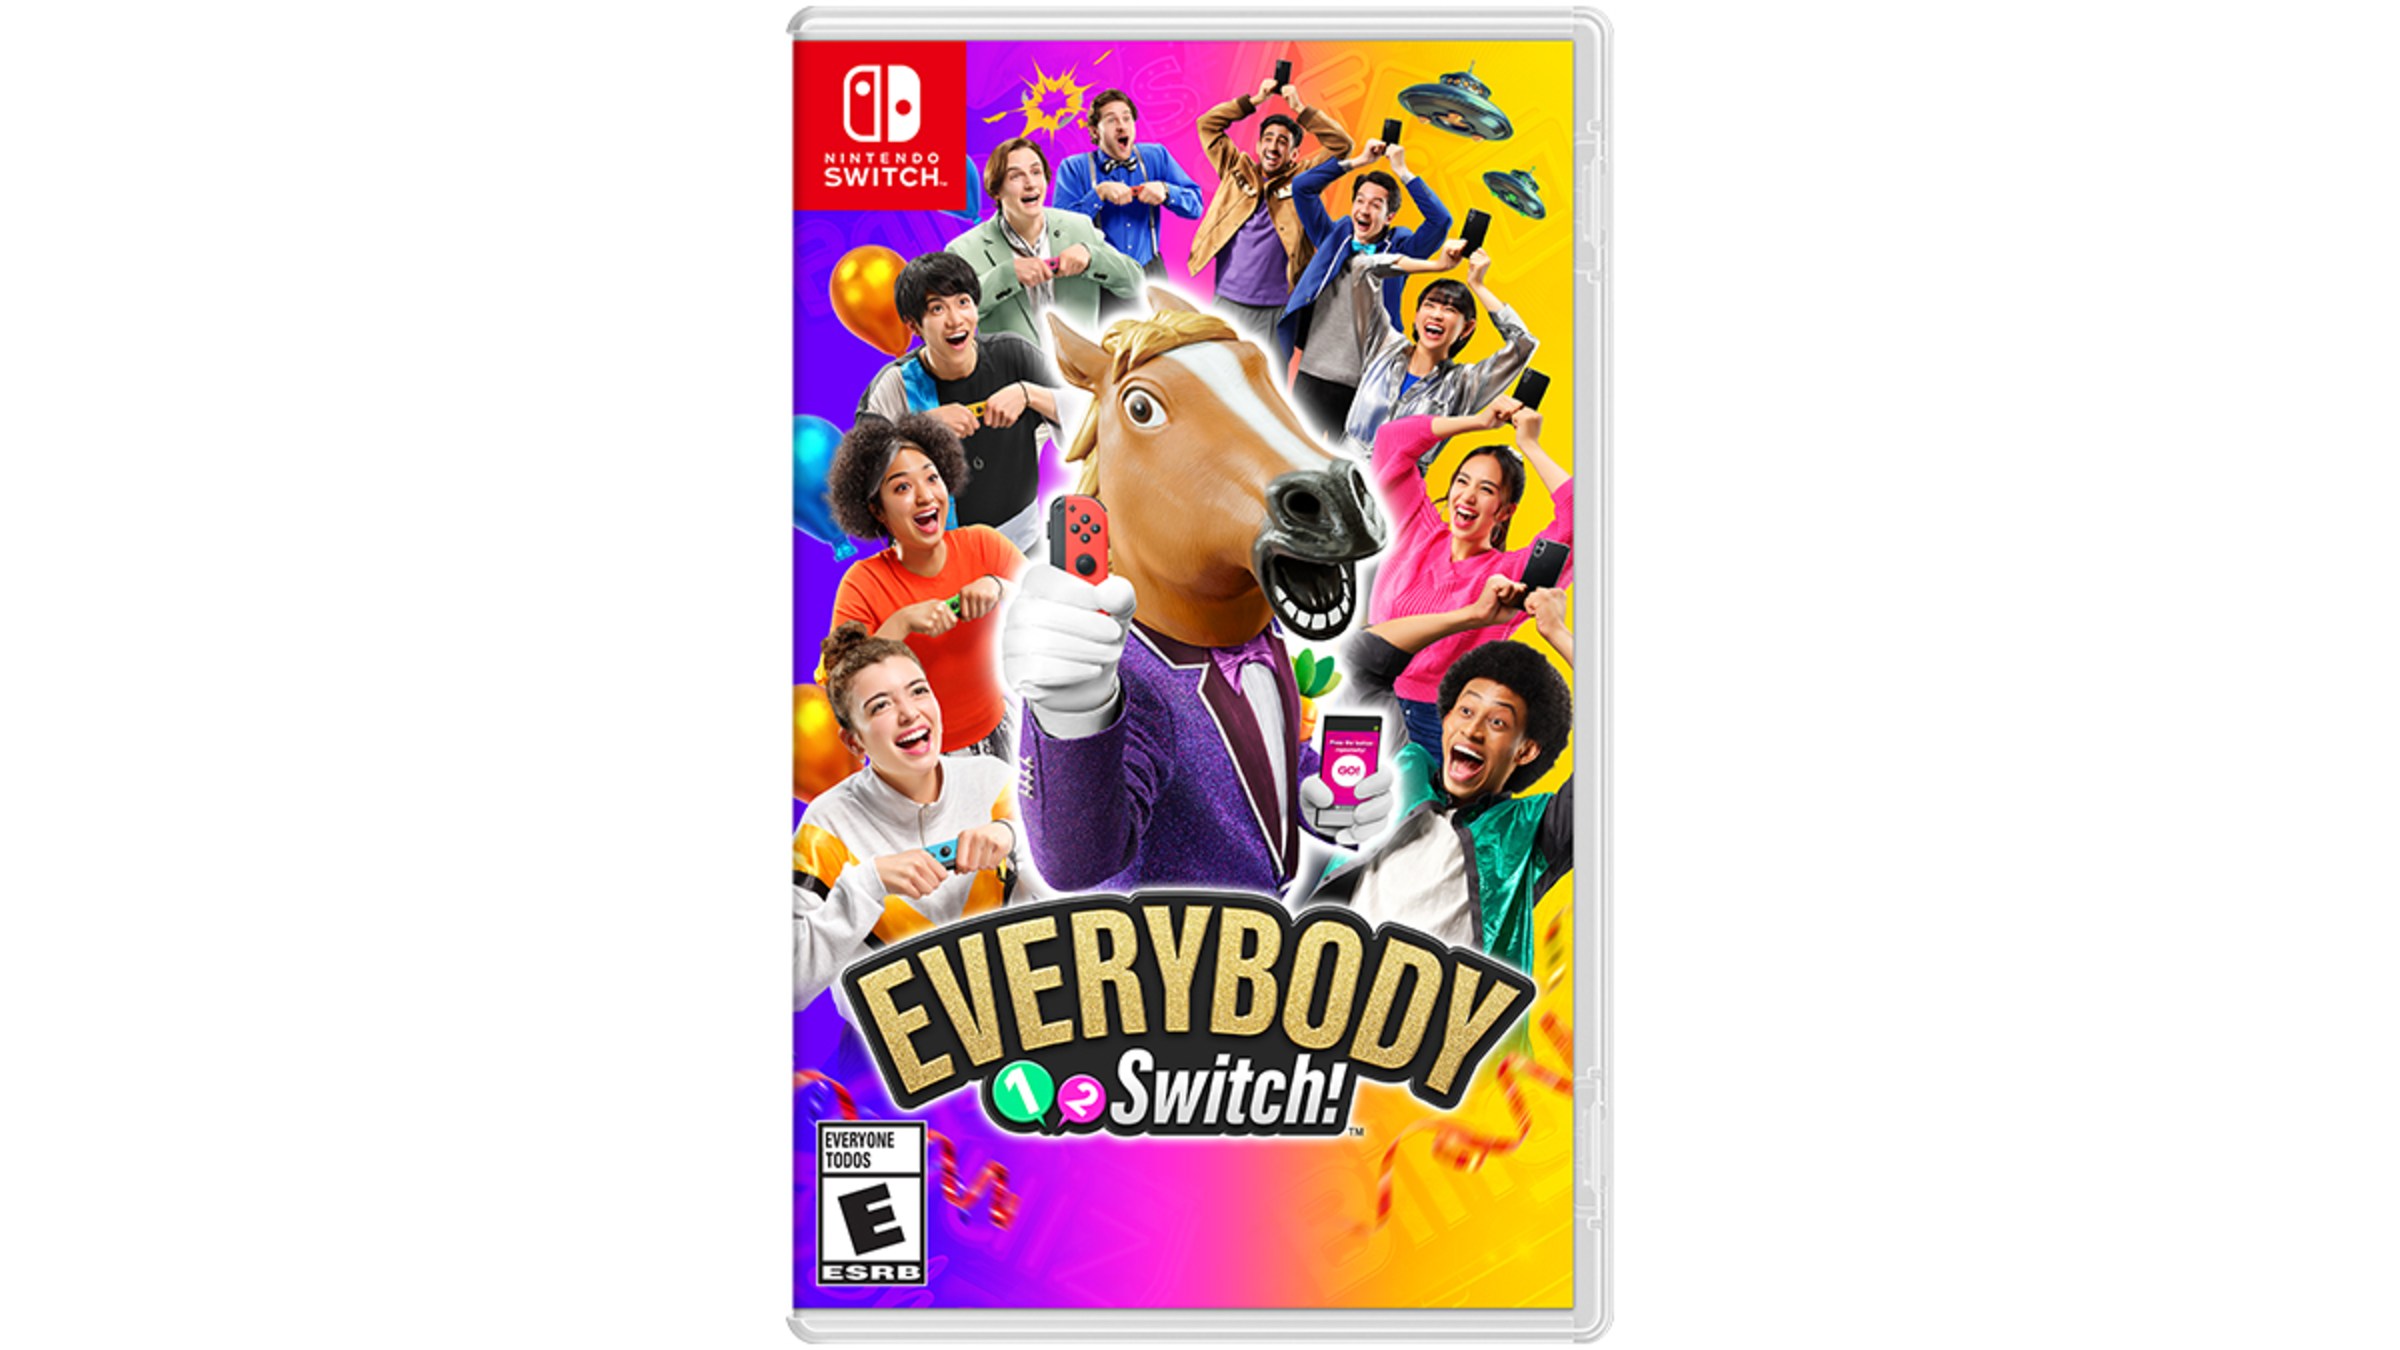 Everybody 1-2-Switch!™ for Nintendo - Site Nintendo Switch Official